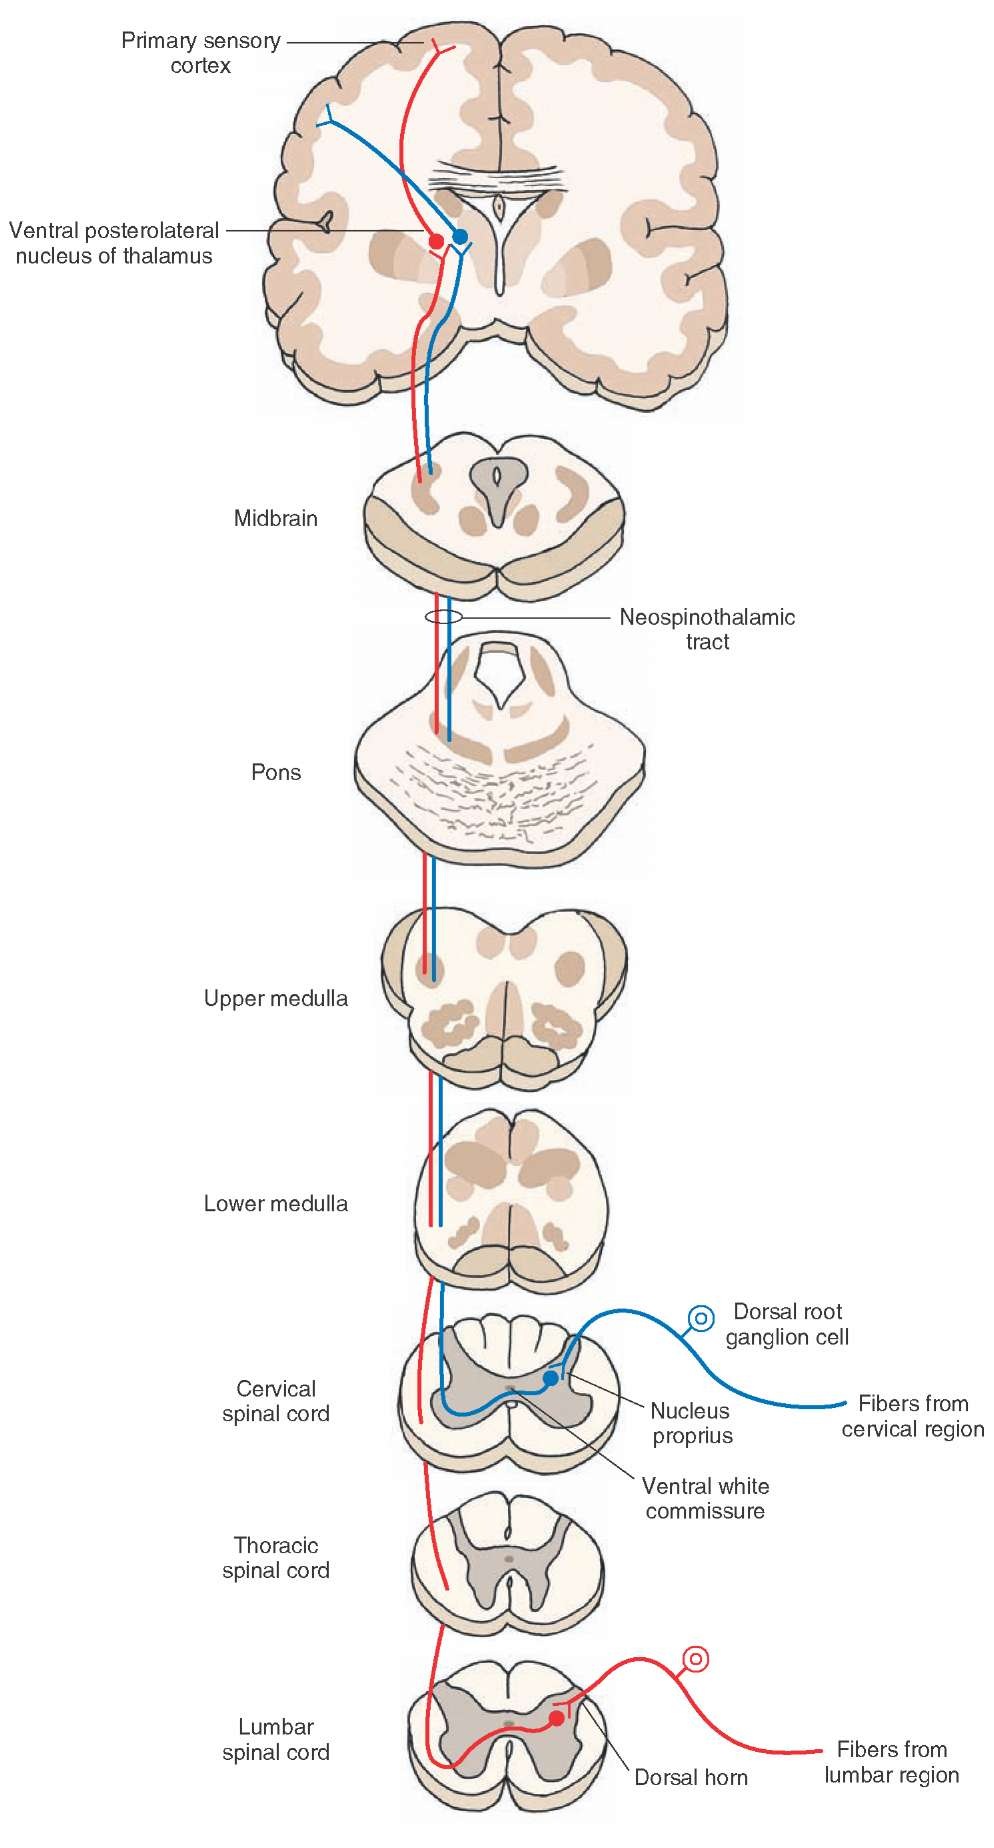 Direct spinothalamic pathway: the neospinothalamic tract. The peripheral processes of these dorsal root ganglion cells end as receptors sensing pain, temperature, and simple tactile sensations. The central processes of these dorsal root ganglion cells synapse with the neurons of the nucleus proprius. The axons of these second-order neurons cross via the anterior white commissure, enter the contralateral white matter, ascend in the lateral funiculus, and synapse on third-order neurons located in the ventral posterolateral nucleus of the thalamus. The axons of third-order neurons project to the primary sensory cortex. 